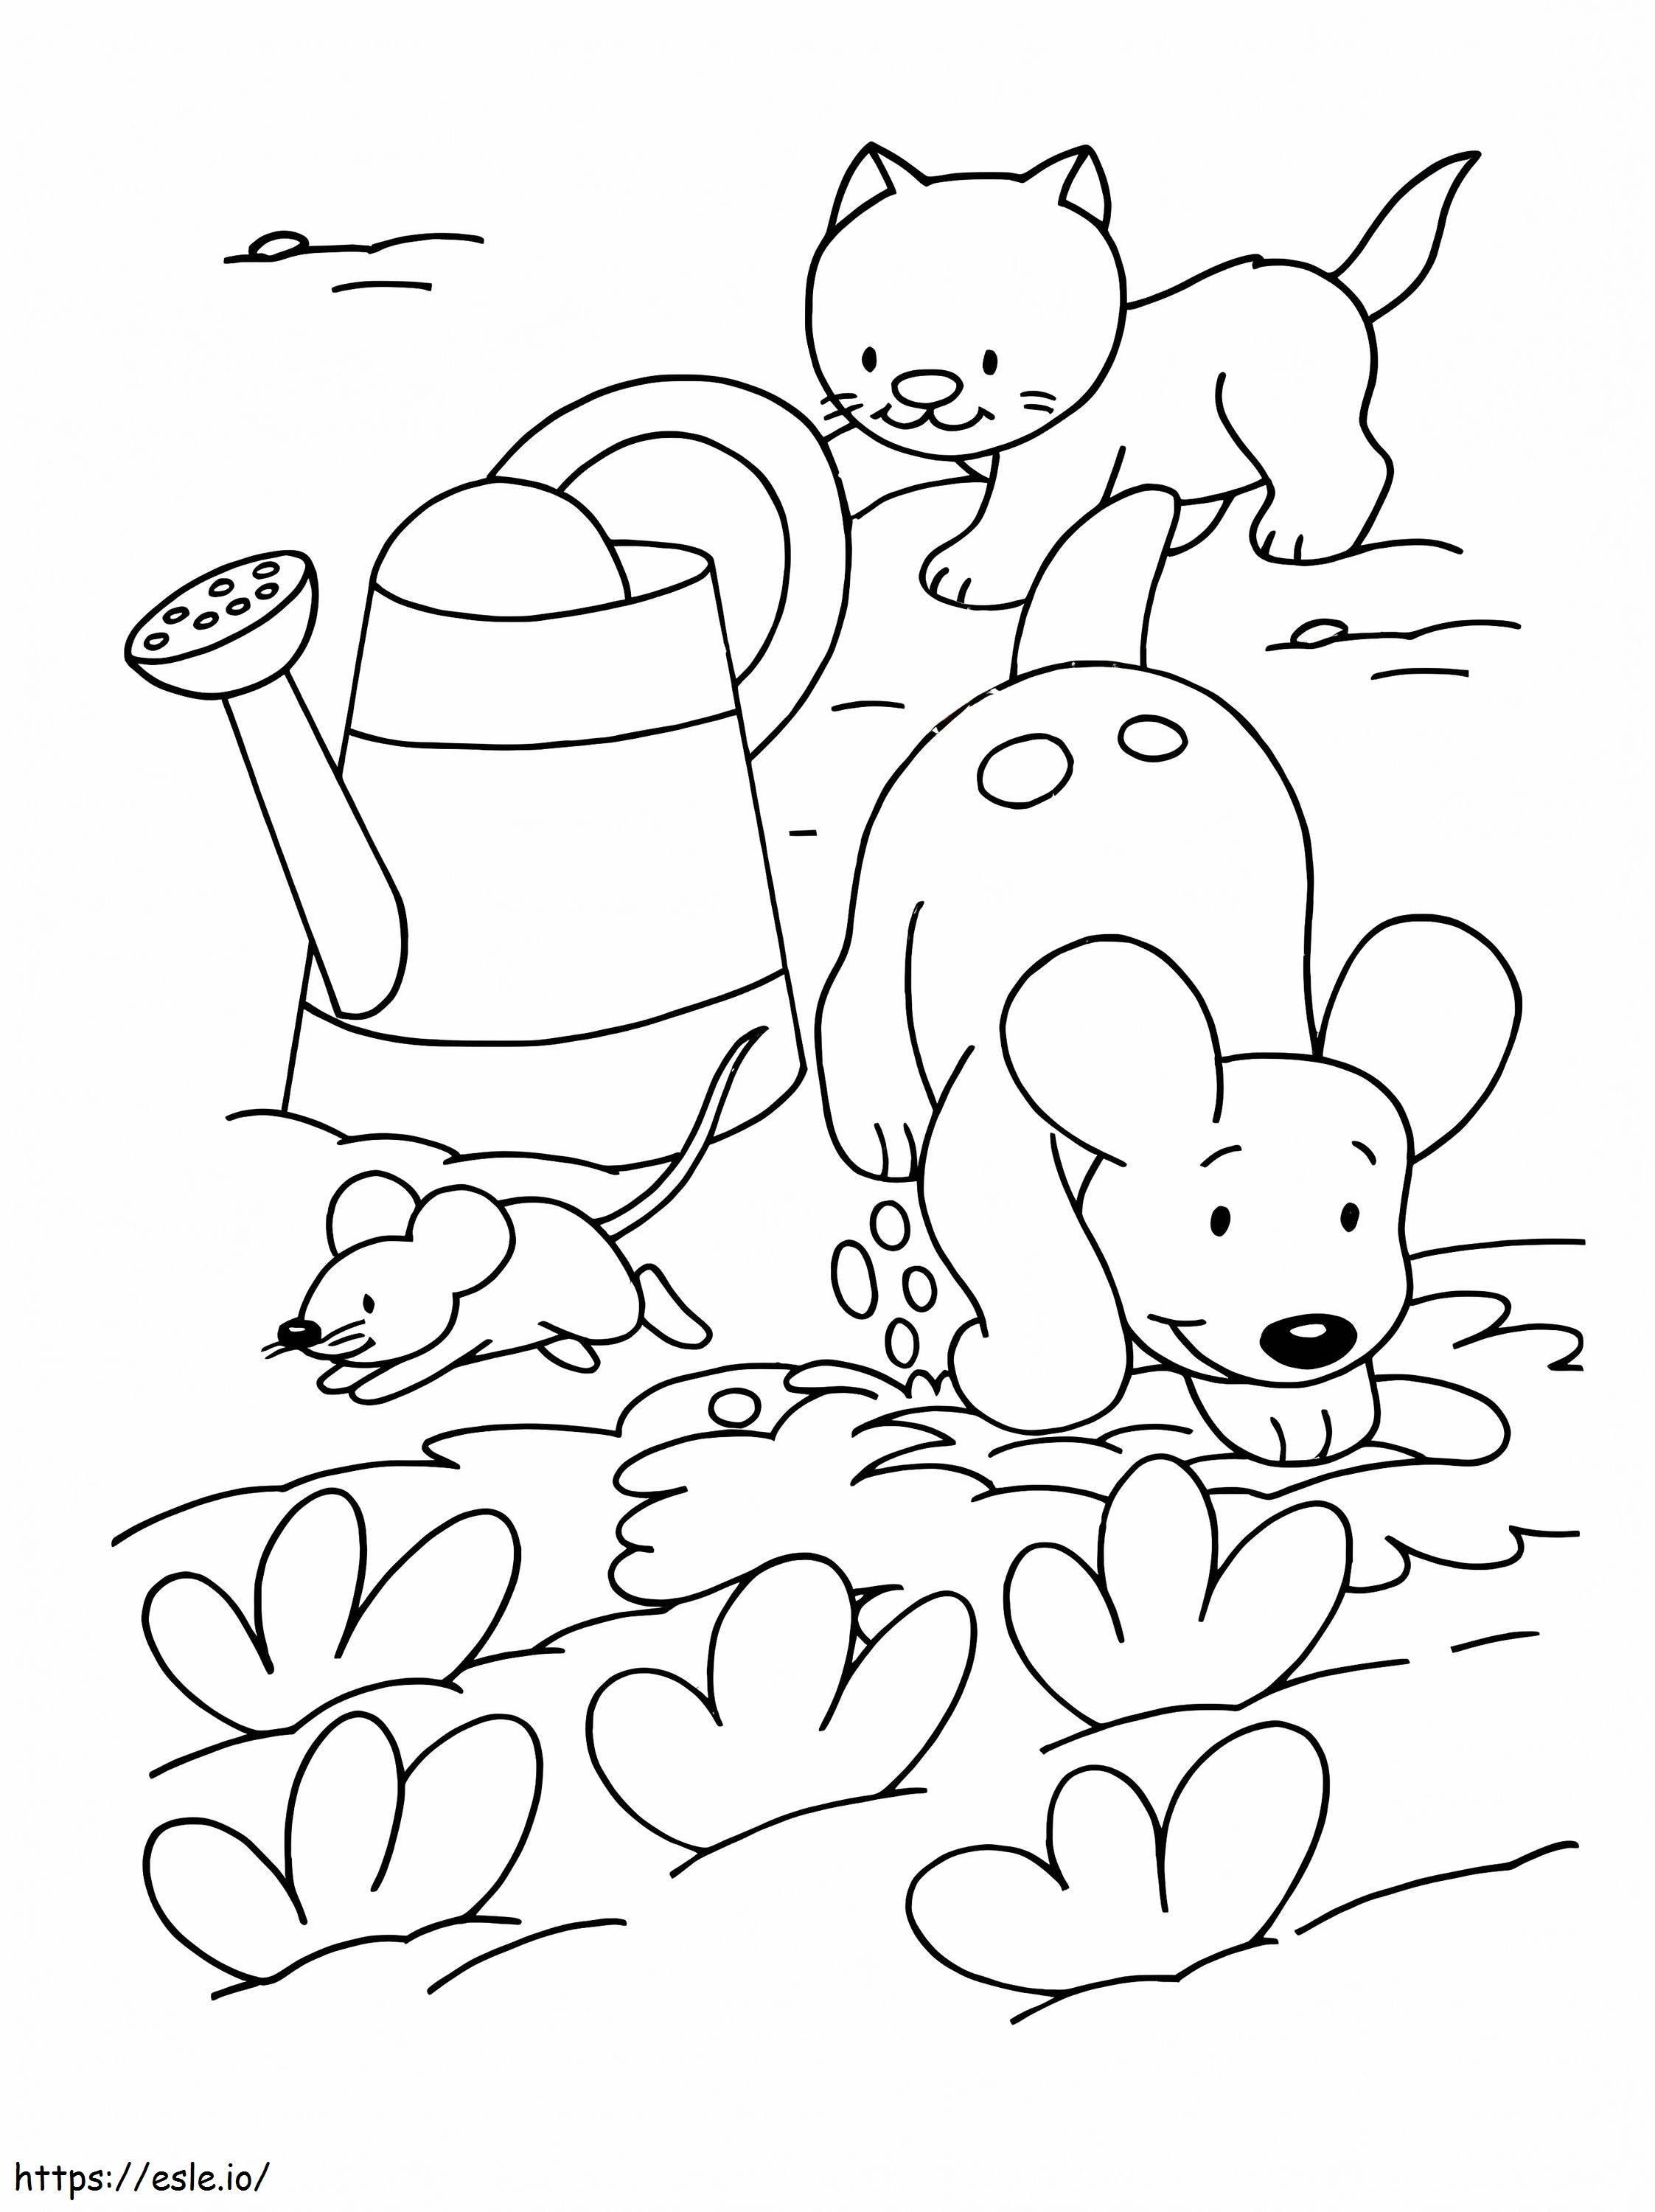 Pets In The Garden Coloring coloring page